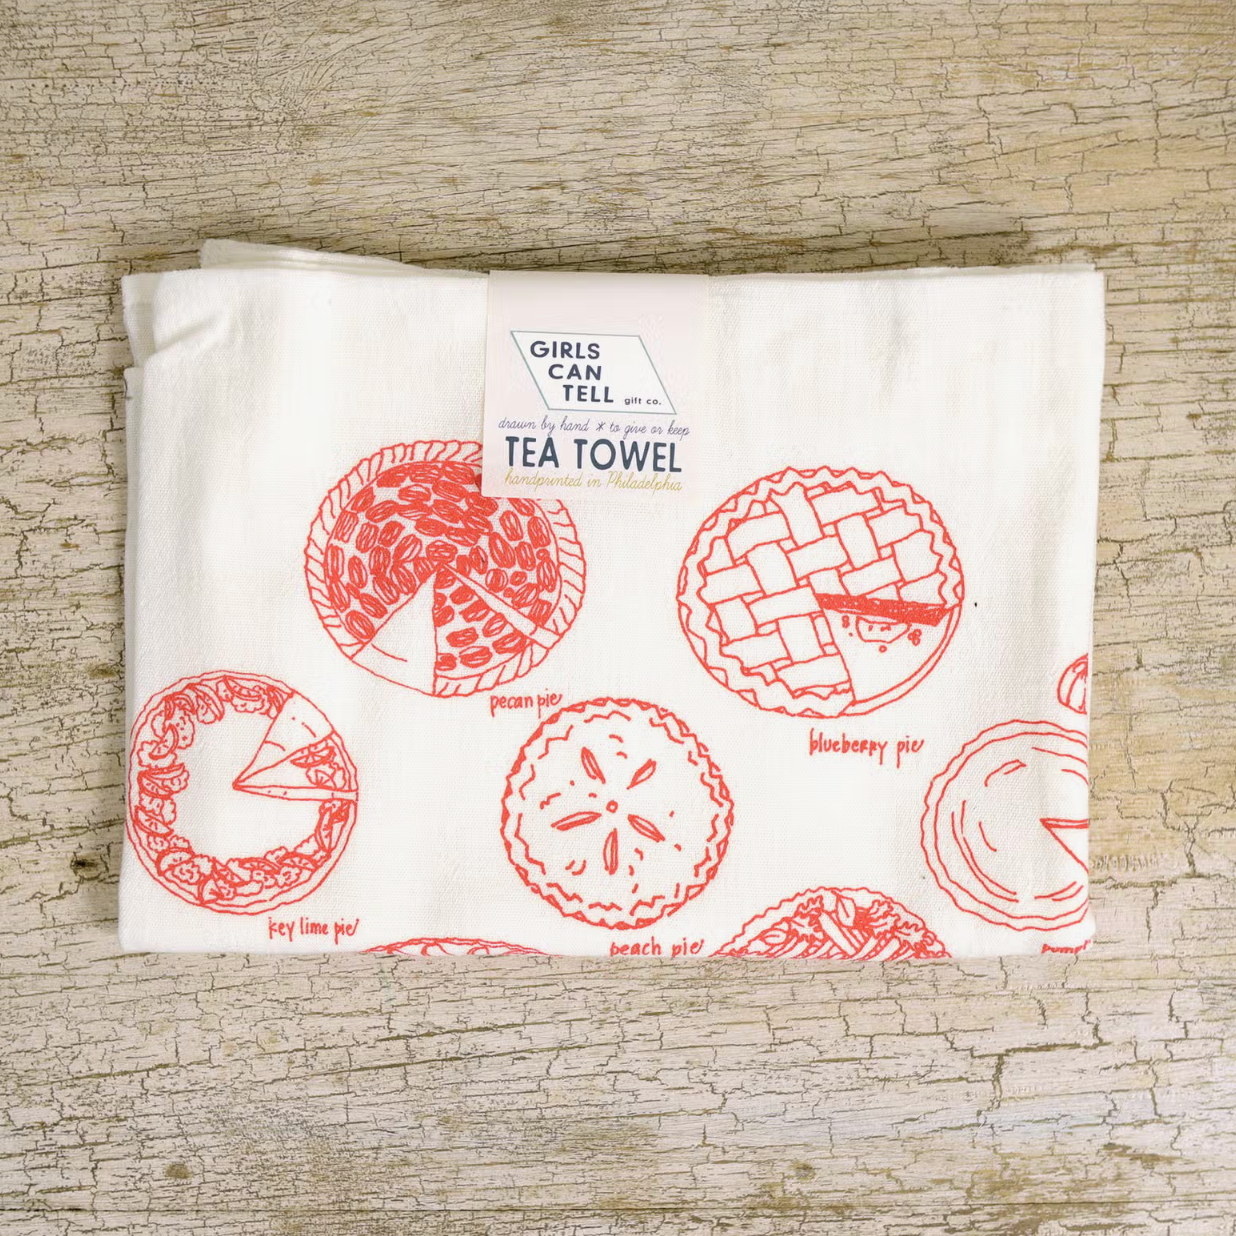 Tea towel with red pies